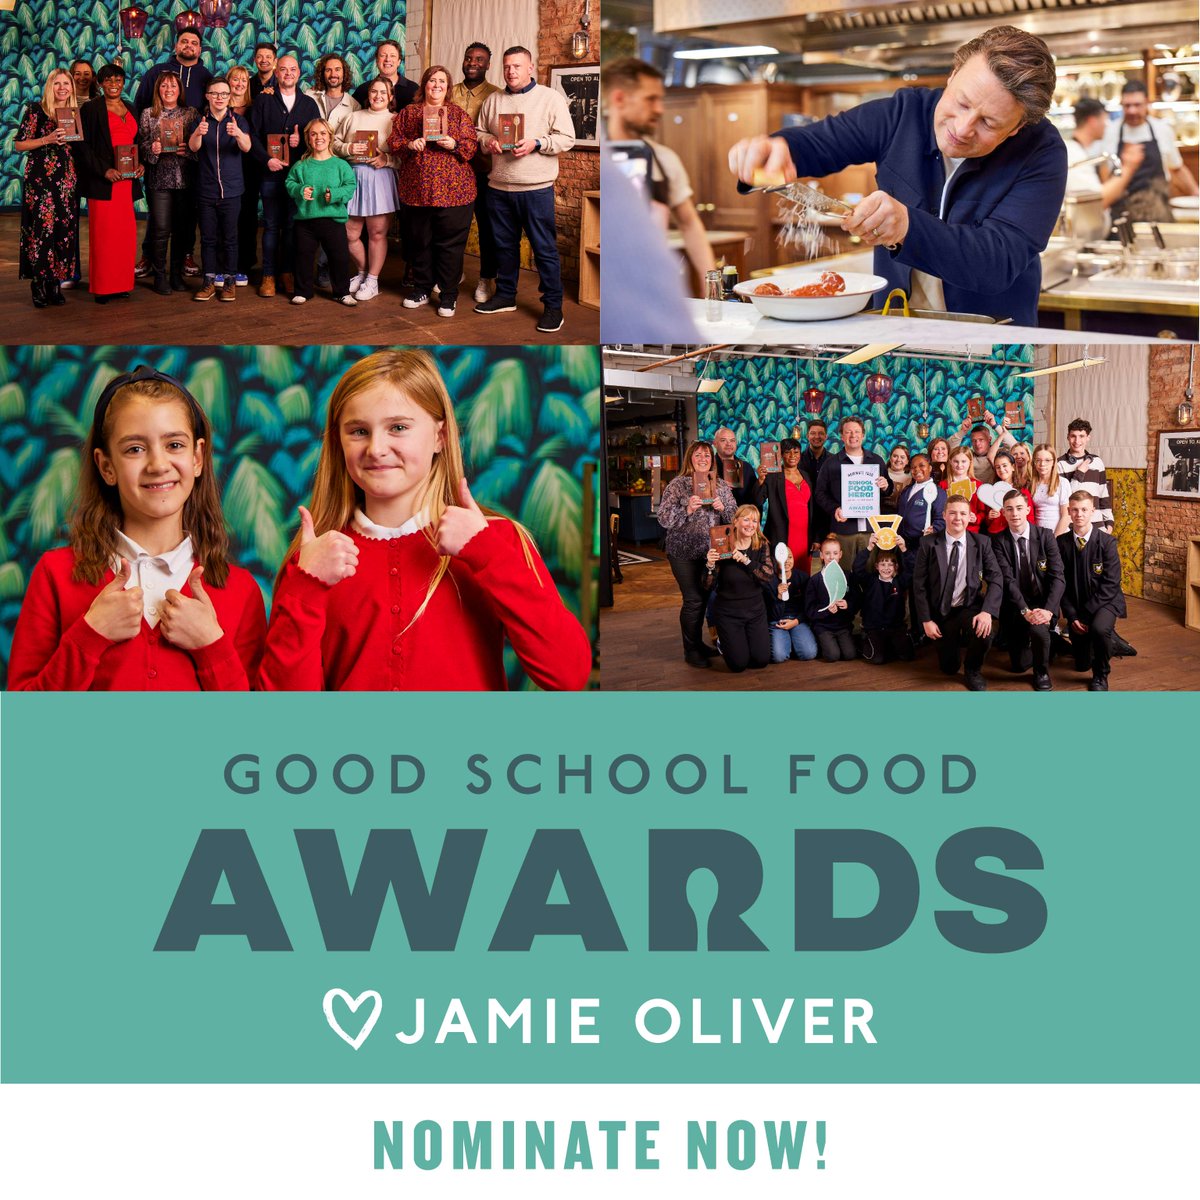 🌟 Celebrate school food heroes with Jamie Oliver! Nominate your champion for The Jamie Oliver Group #GoodSchoolFoodAwards highlighting those making a real difference in kids' lives! 💪✨ 

Honour the power of good food in education and nominate now! 👉 ow.ly/3W7O50QESPJ